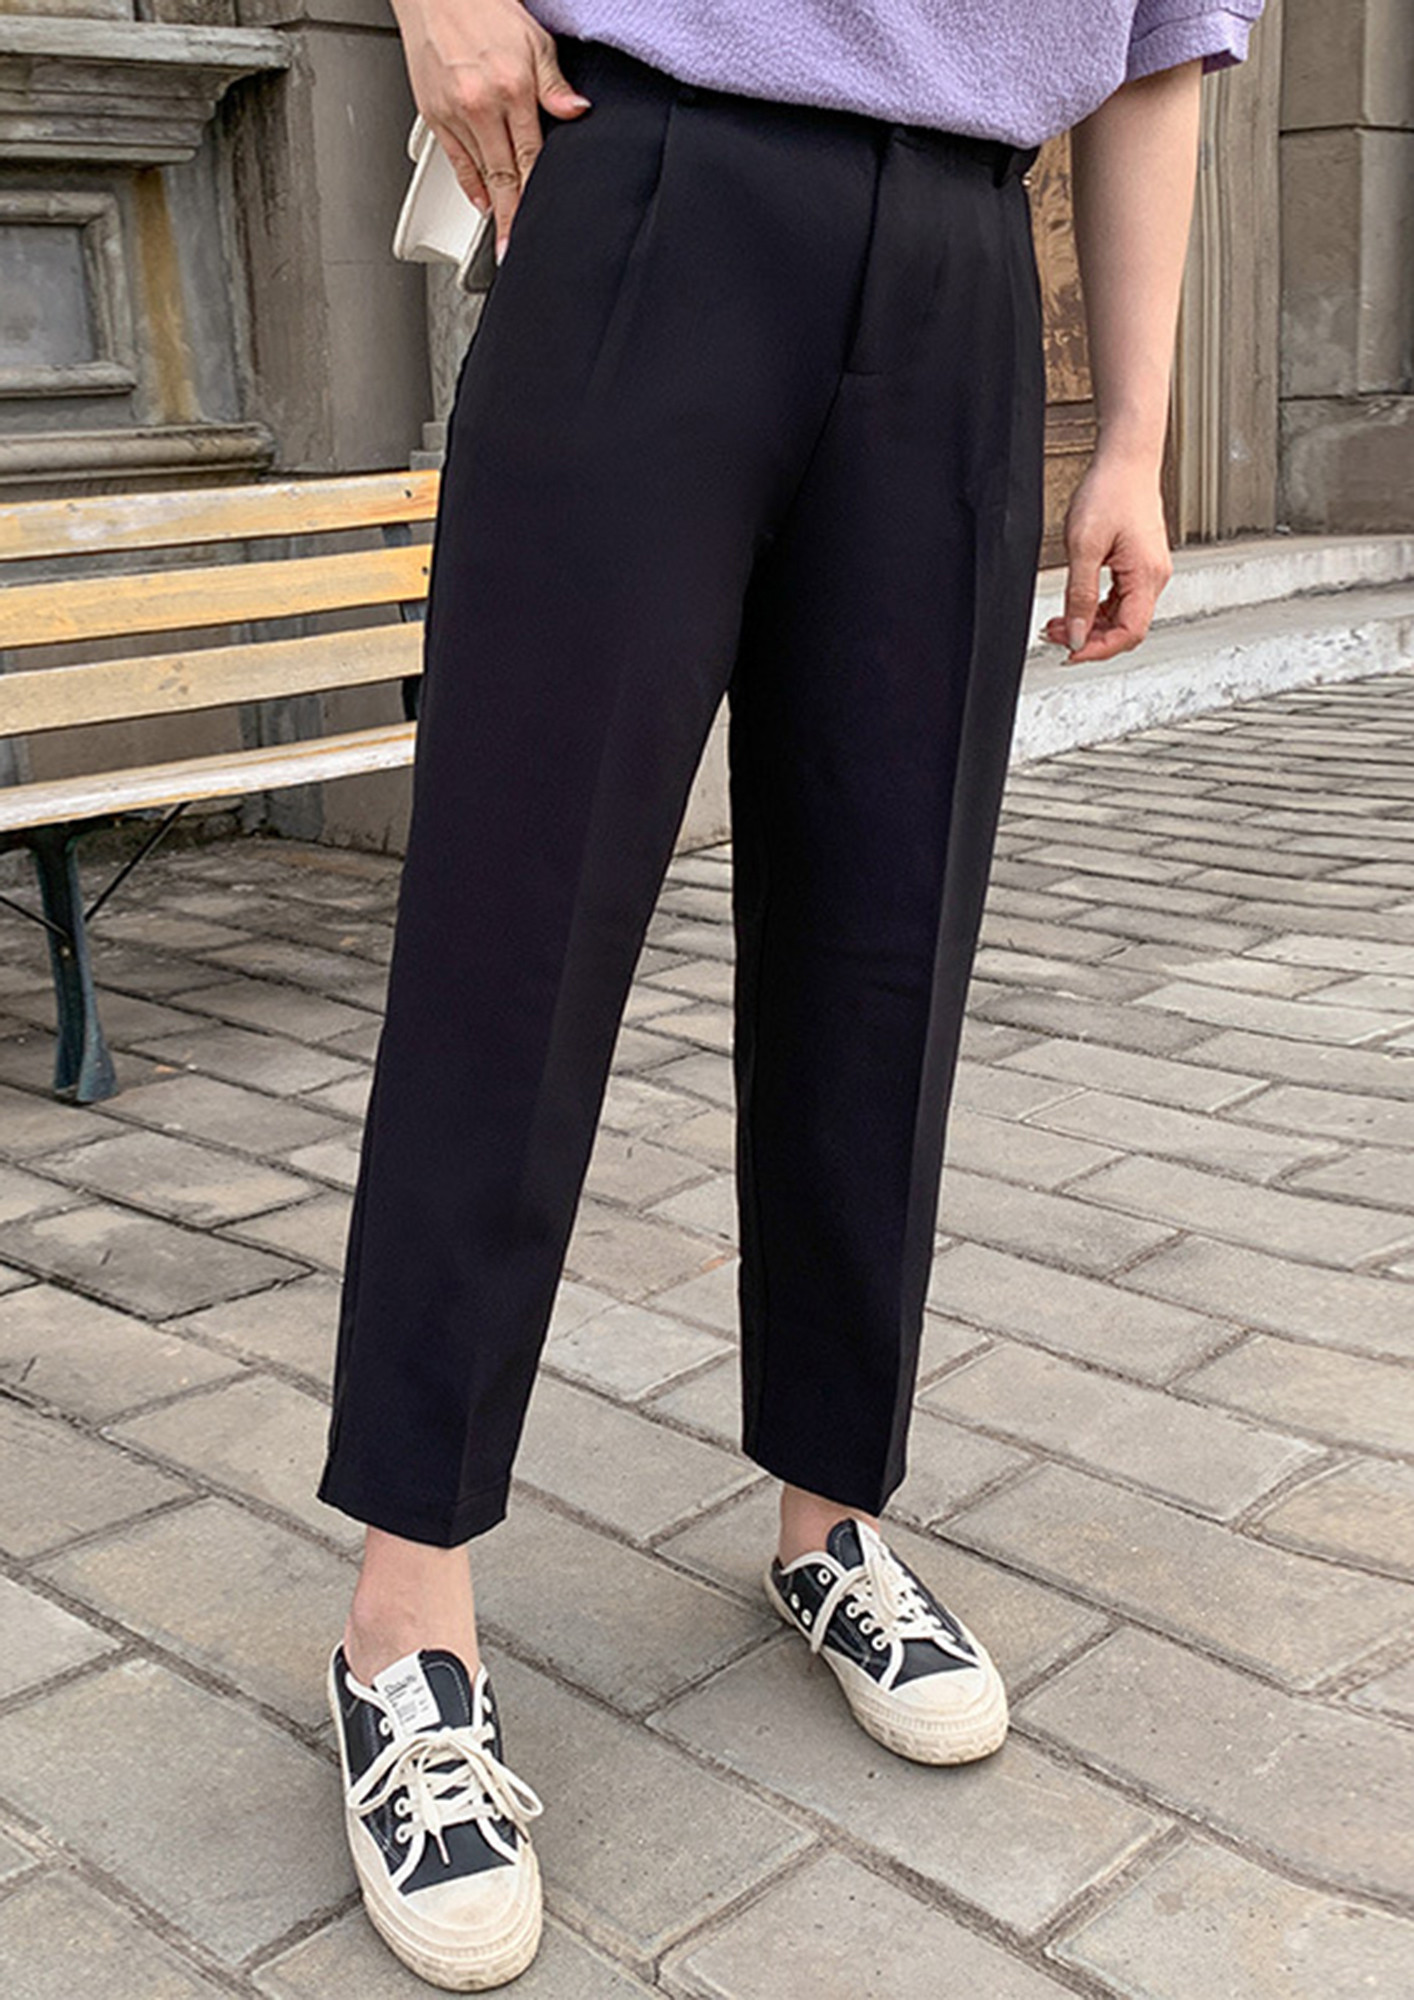 Experience more than 113 tapered trousers super hot